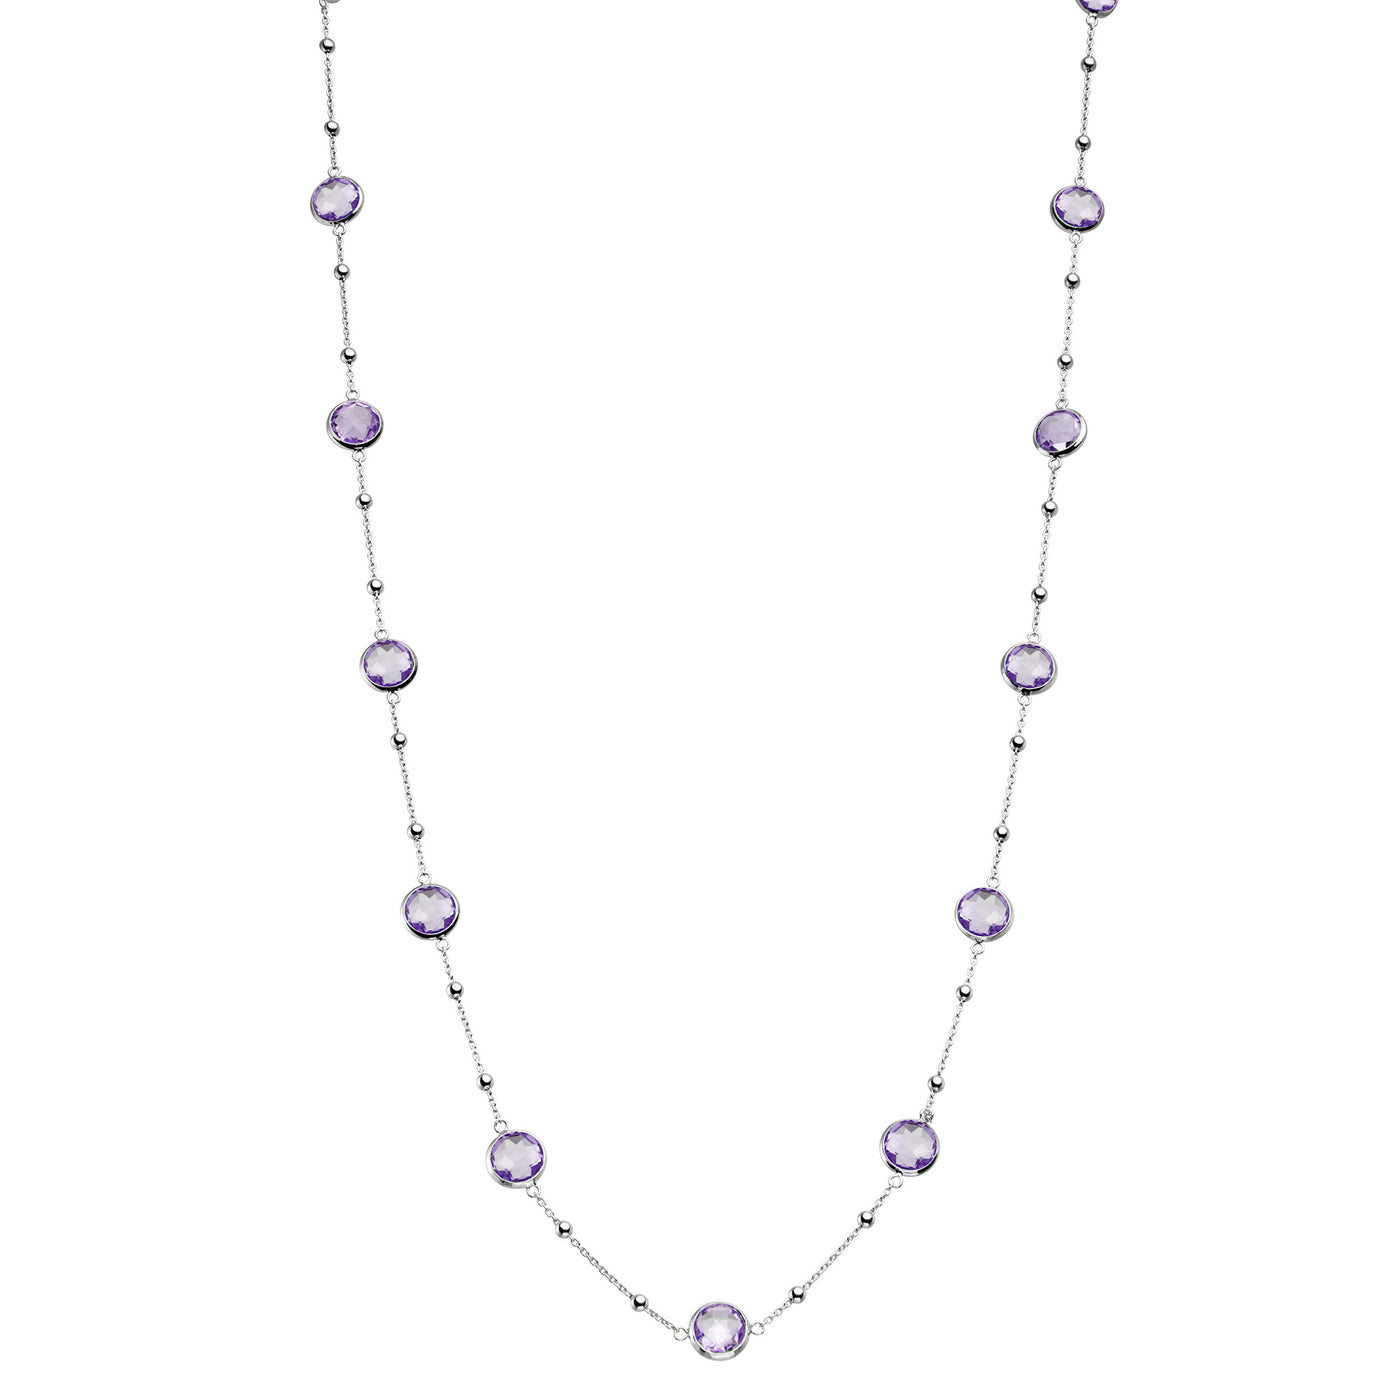 Rebecca Sloane Silver Station Necklace With Small Round Amethyst 